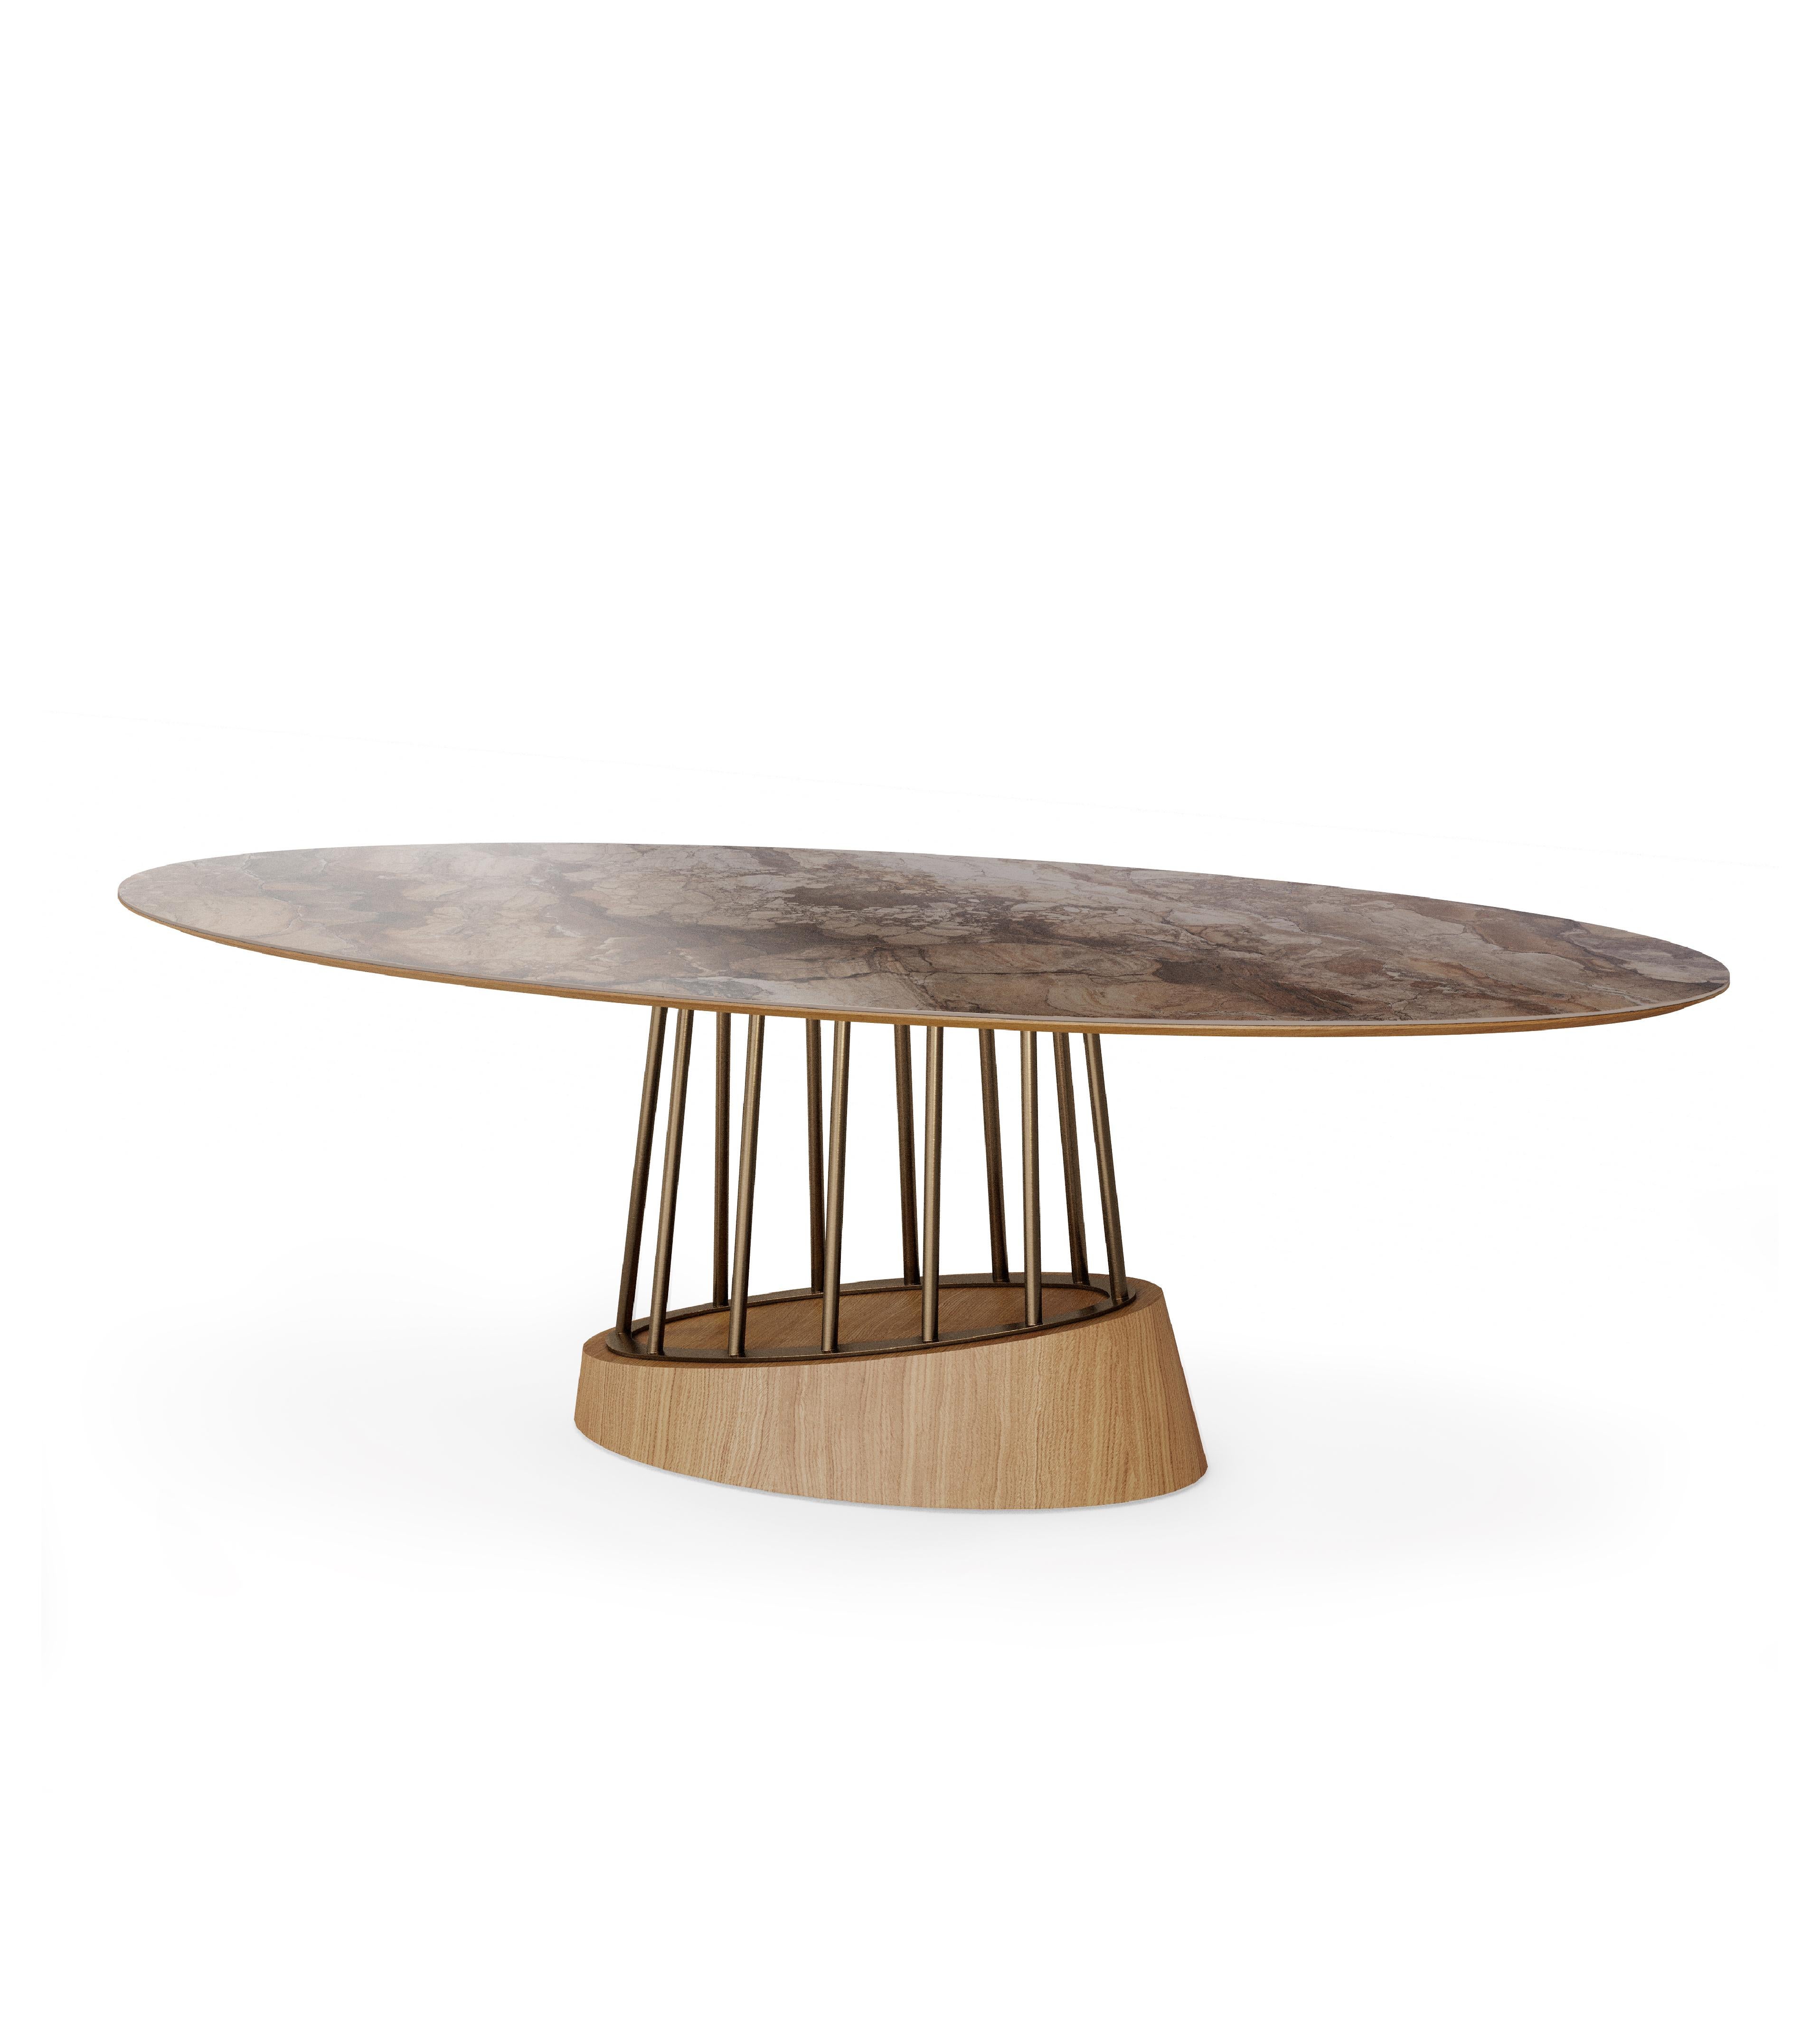 Soleil in an extravagant dining table with a contemporary design. This dining table features a combination of wood, stainless steel and ceramic.